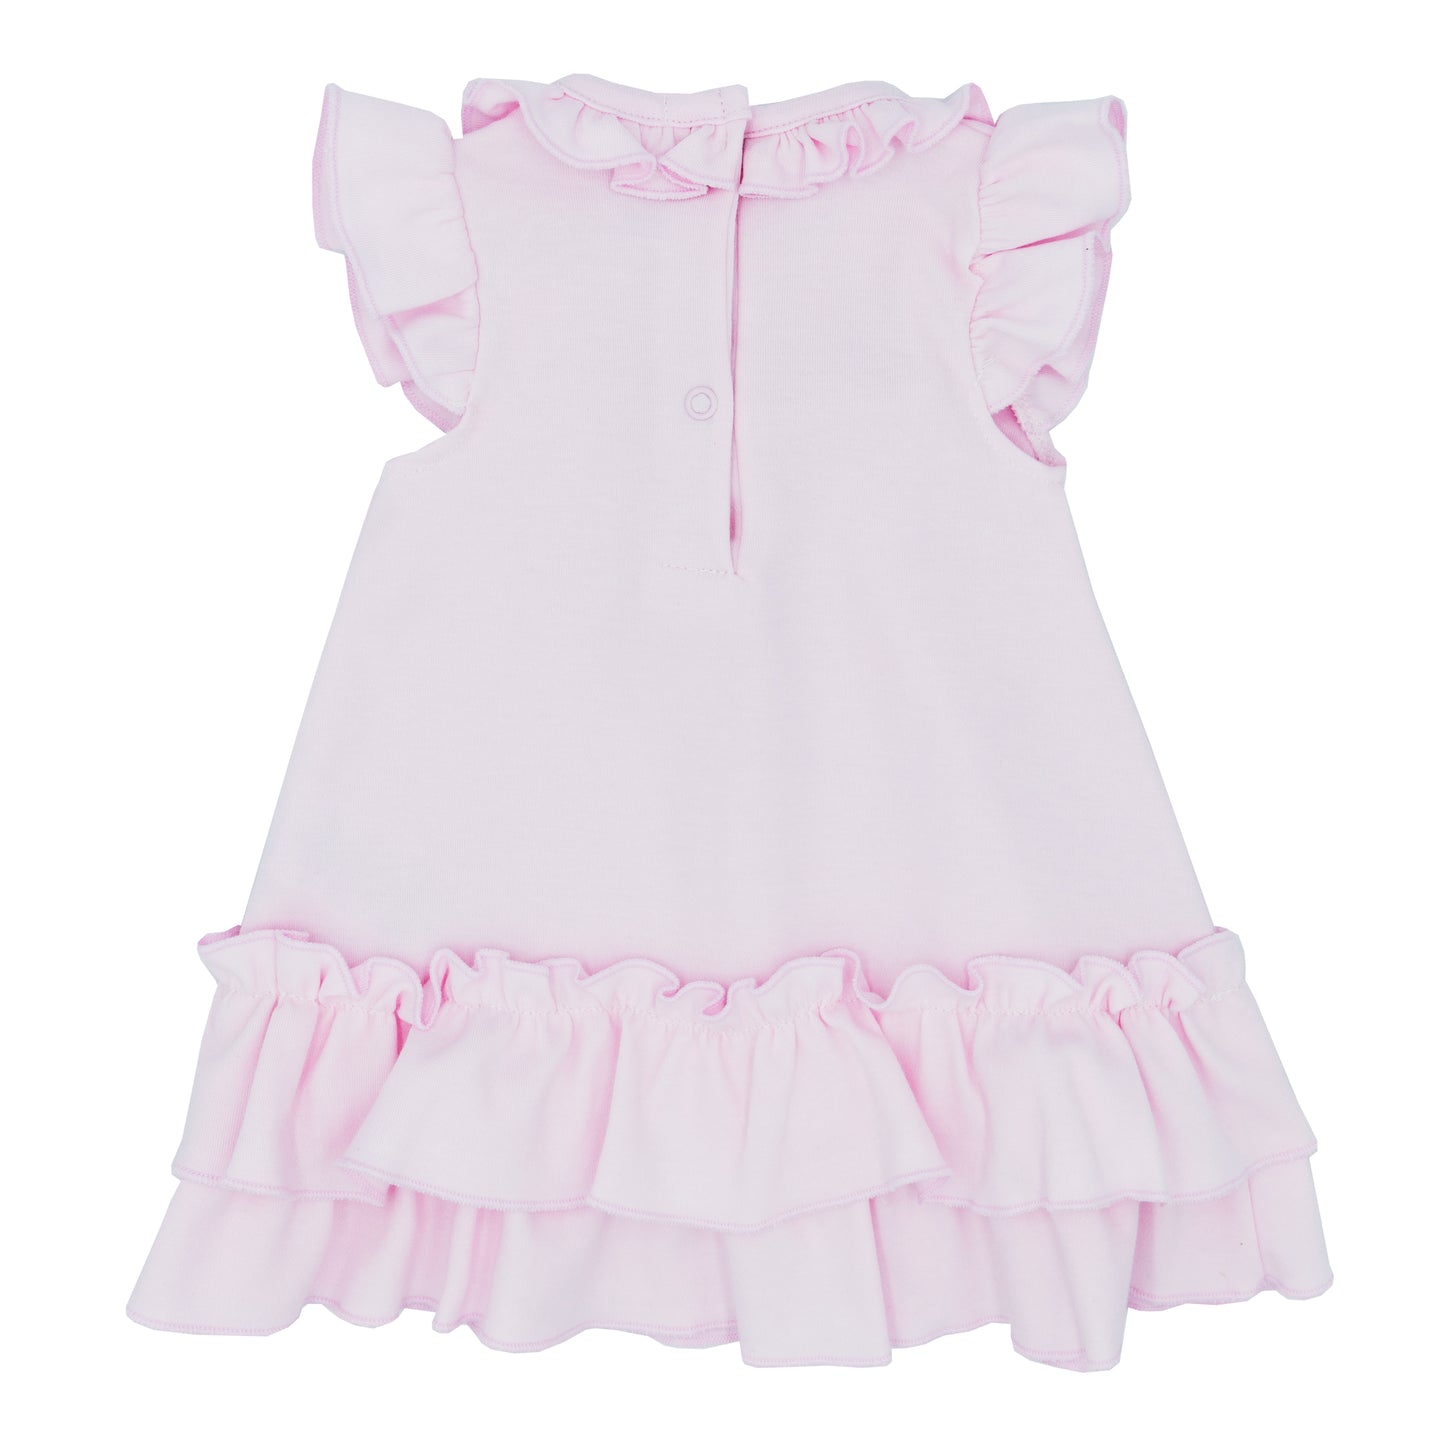 Blues Baby Girls Napoli Collection Pink Dress with Satin Bow back